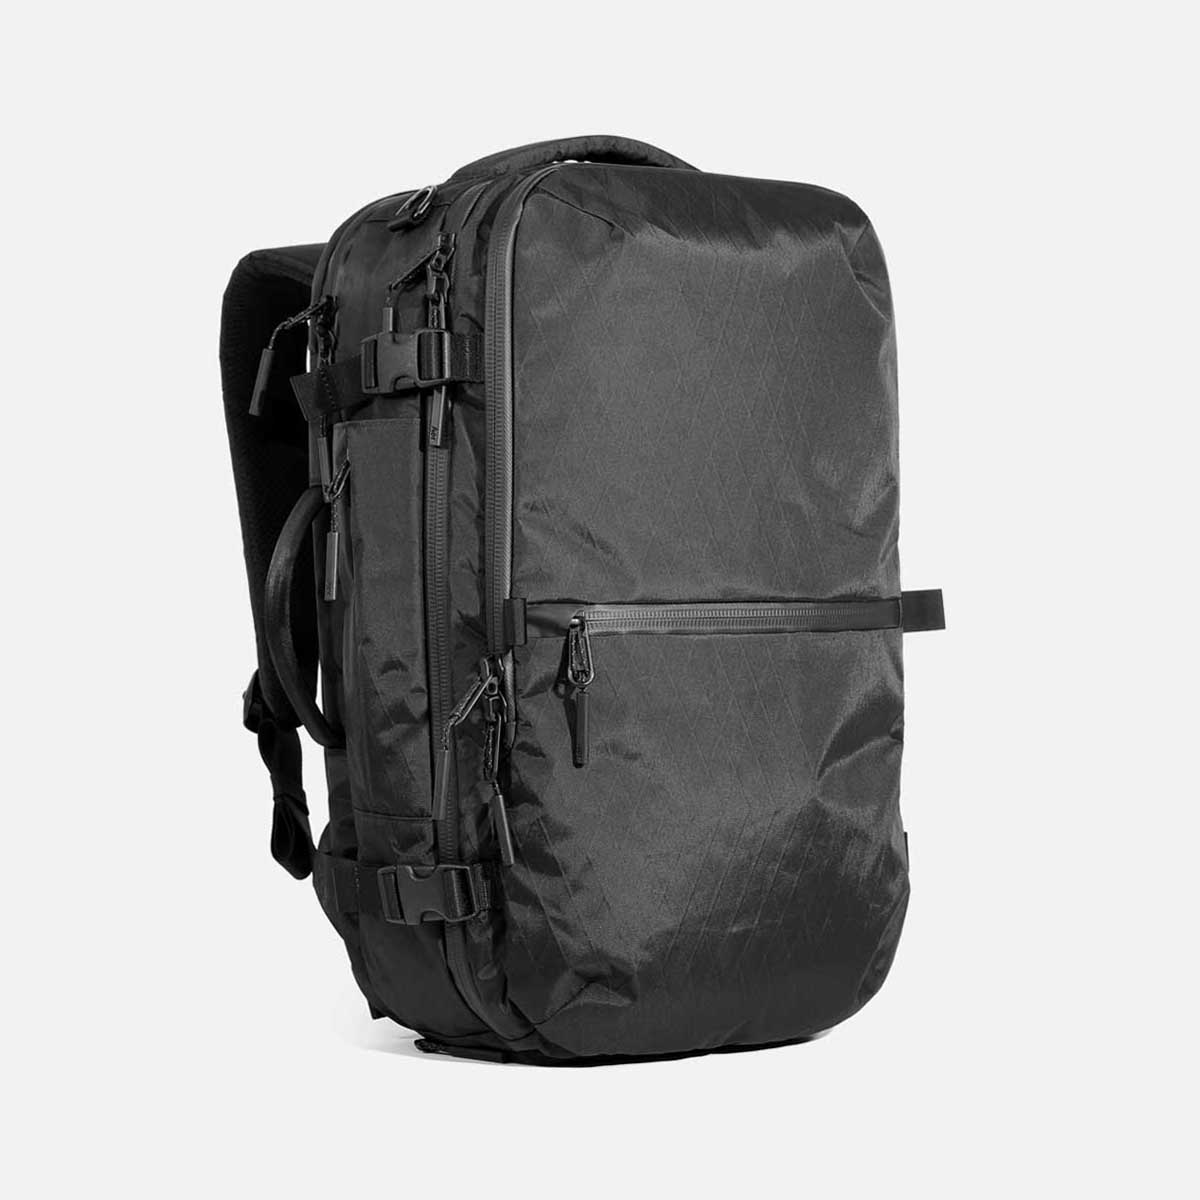 Aer travel pack 2 x pac-